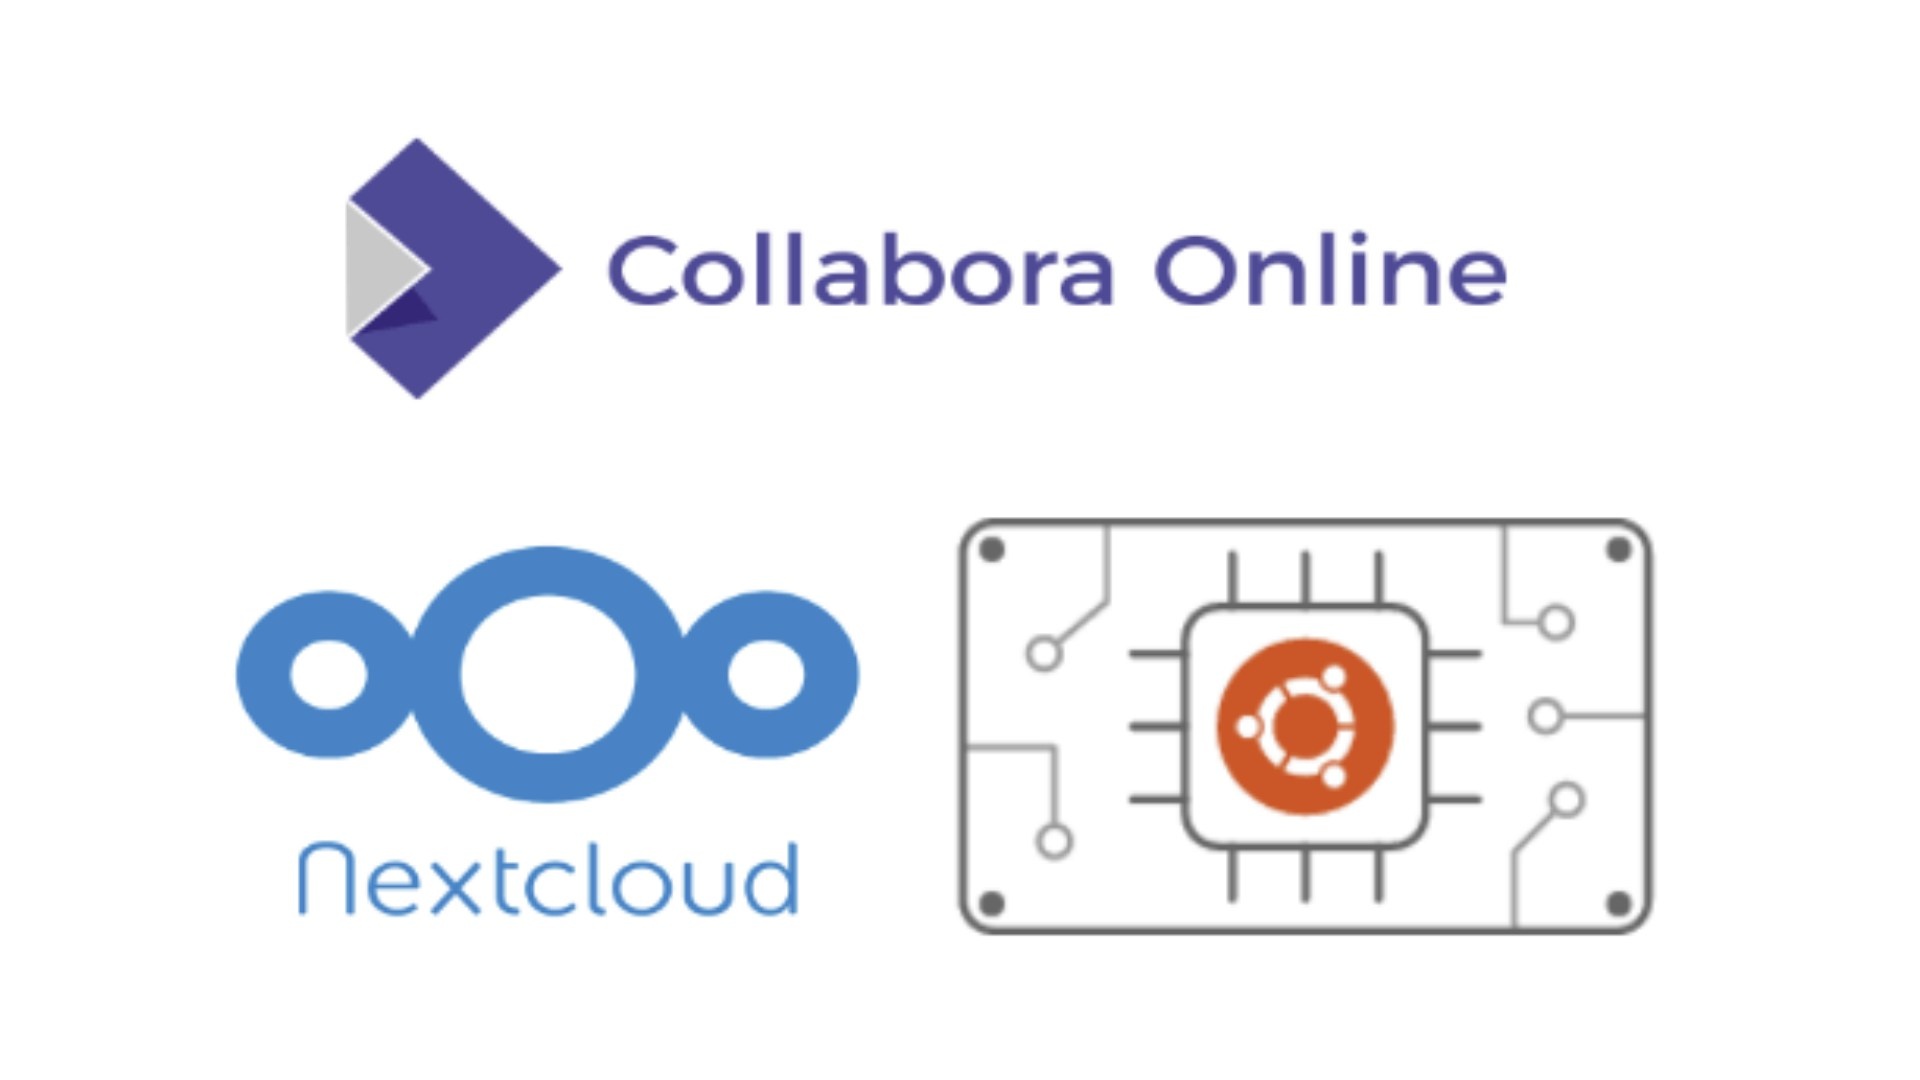 Canonical, Collabora, and Nextcloud Deliver Work From Home Solution to Raspberry Pi Users